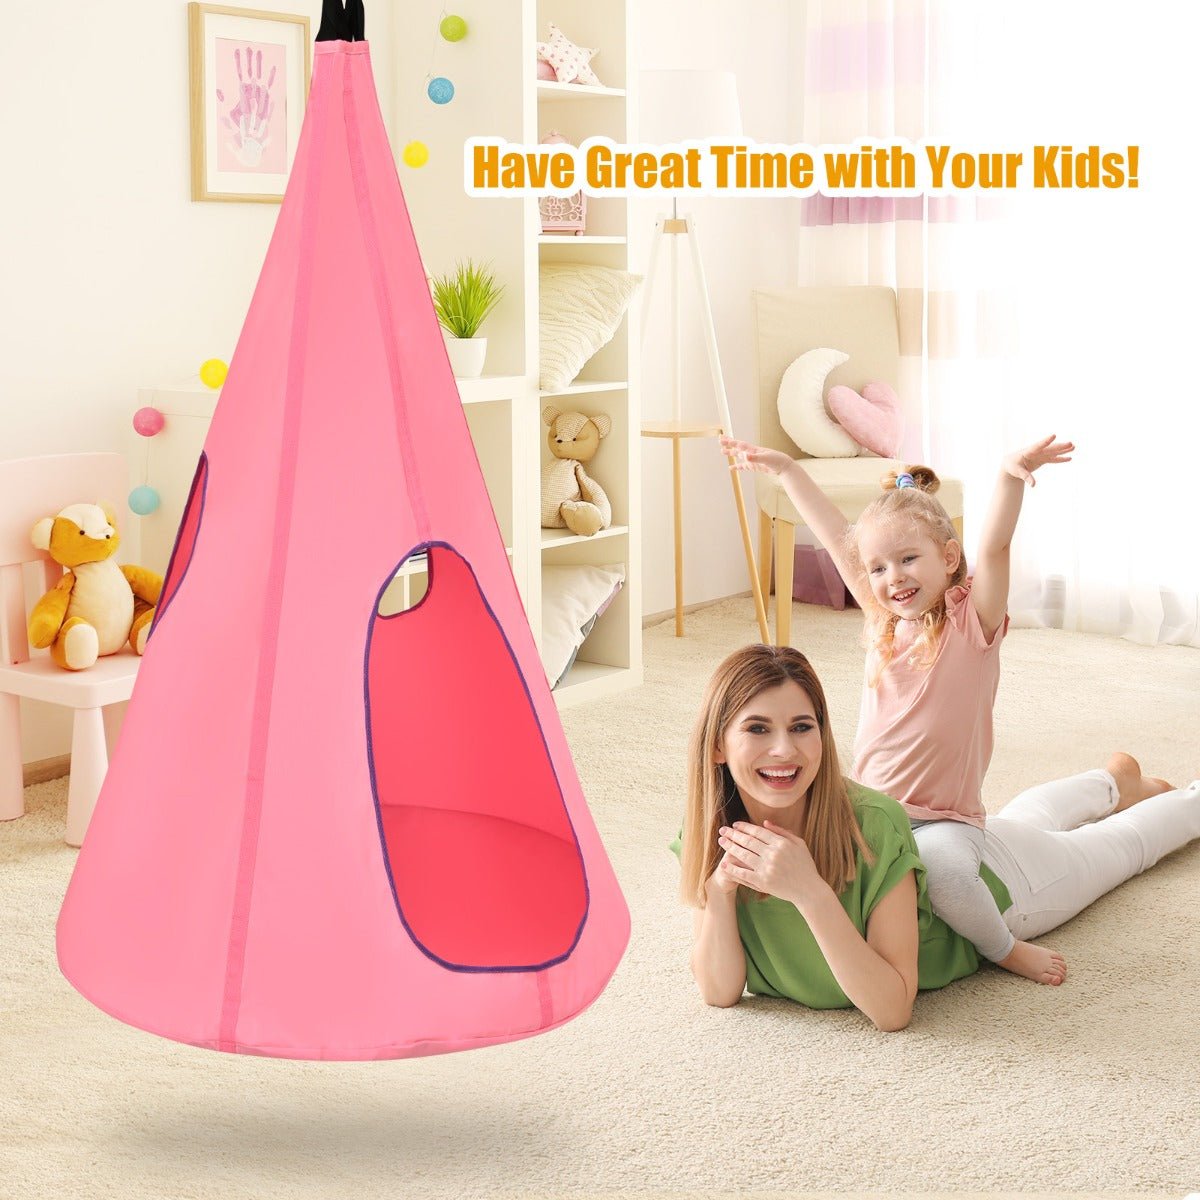 Whimsical Delight: Kids Nest Swing Tent Pink 80cm, Swing into Imagination